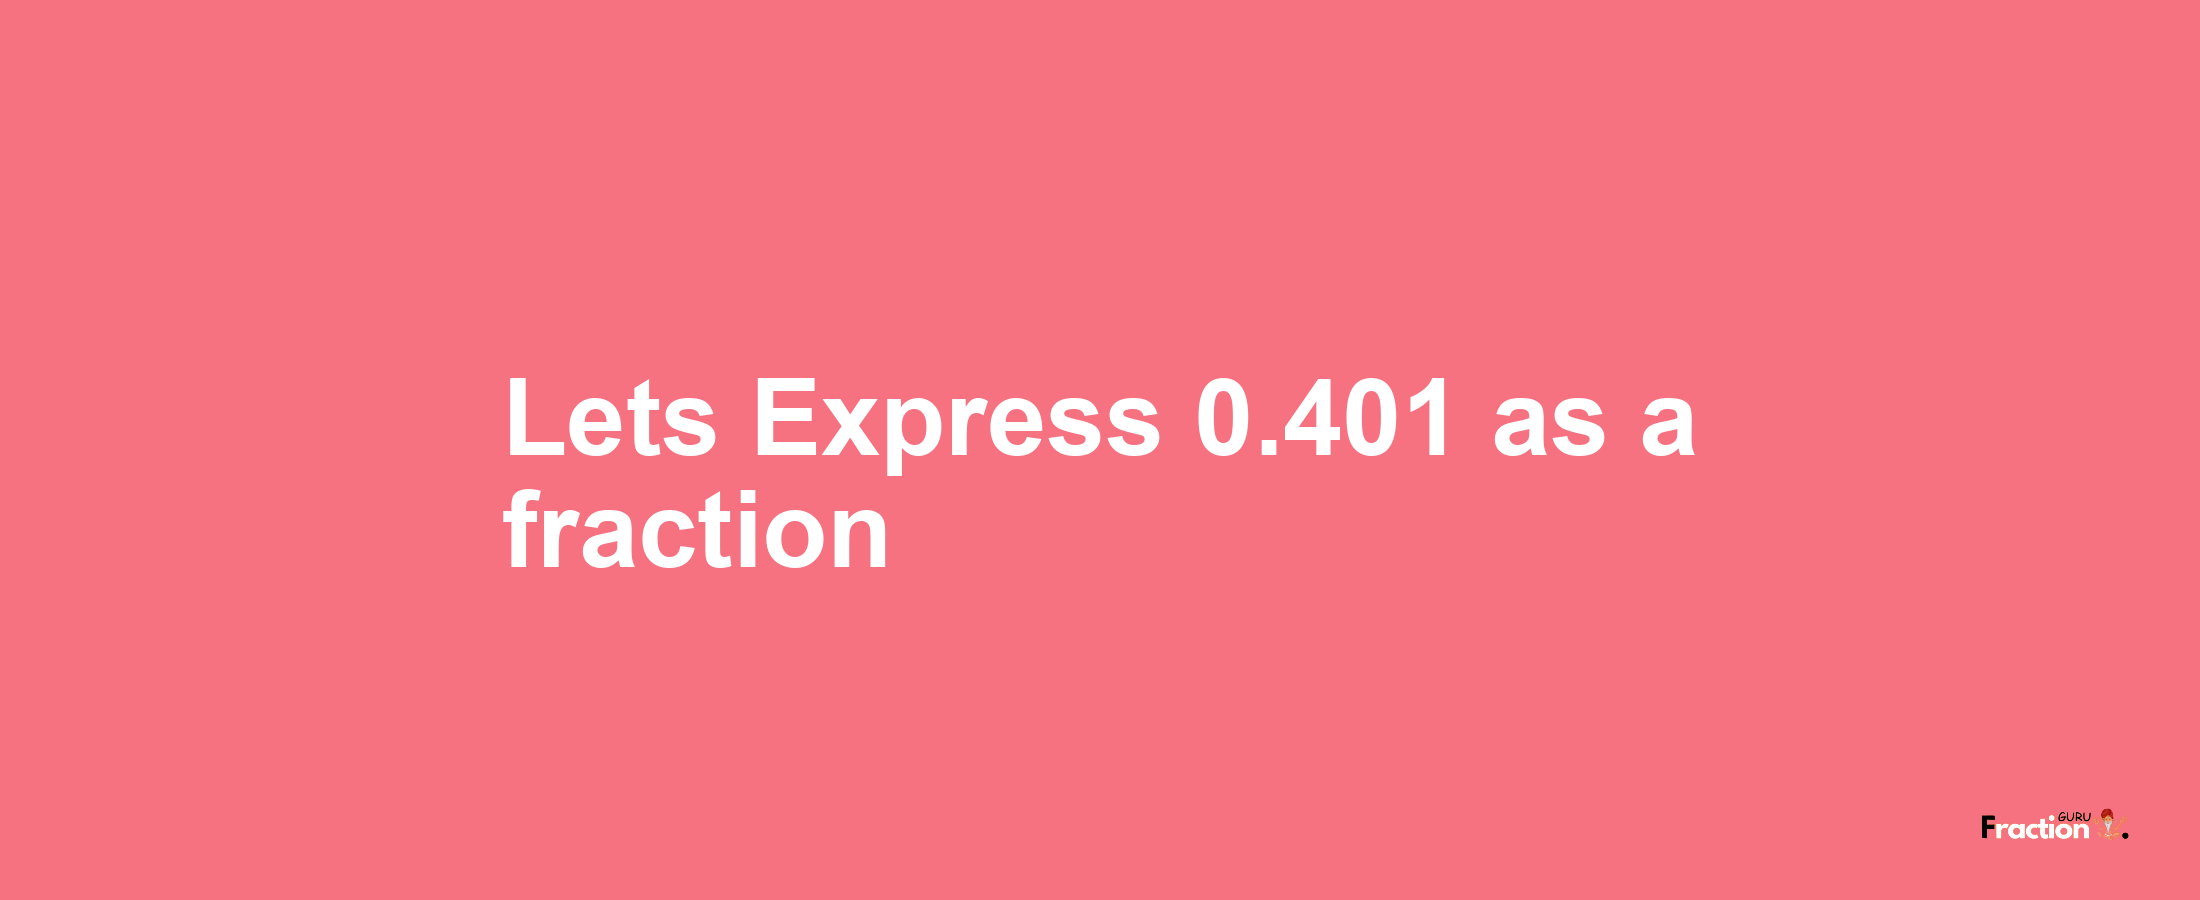 Lets Express 0.401 as afraction